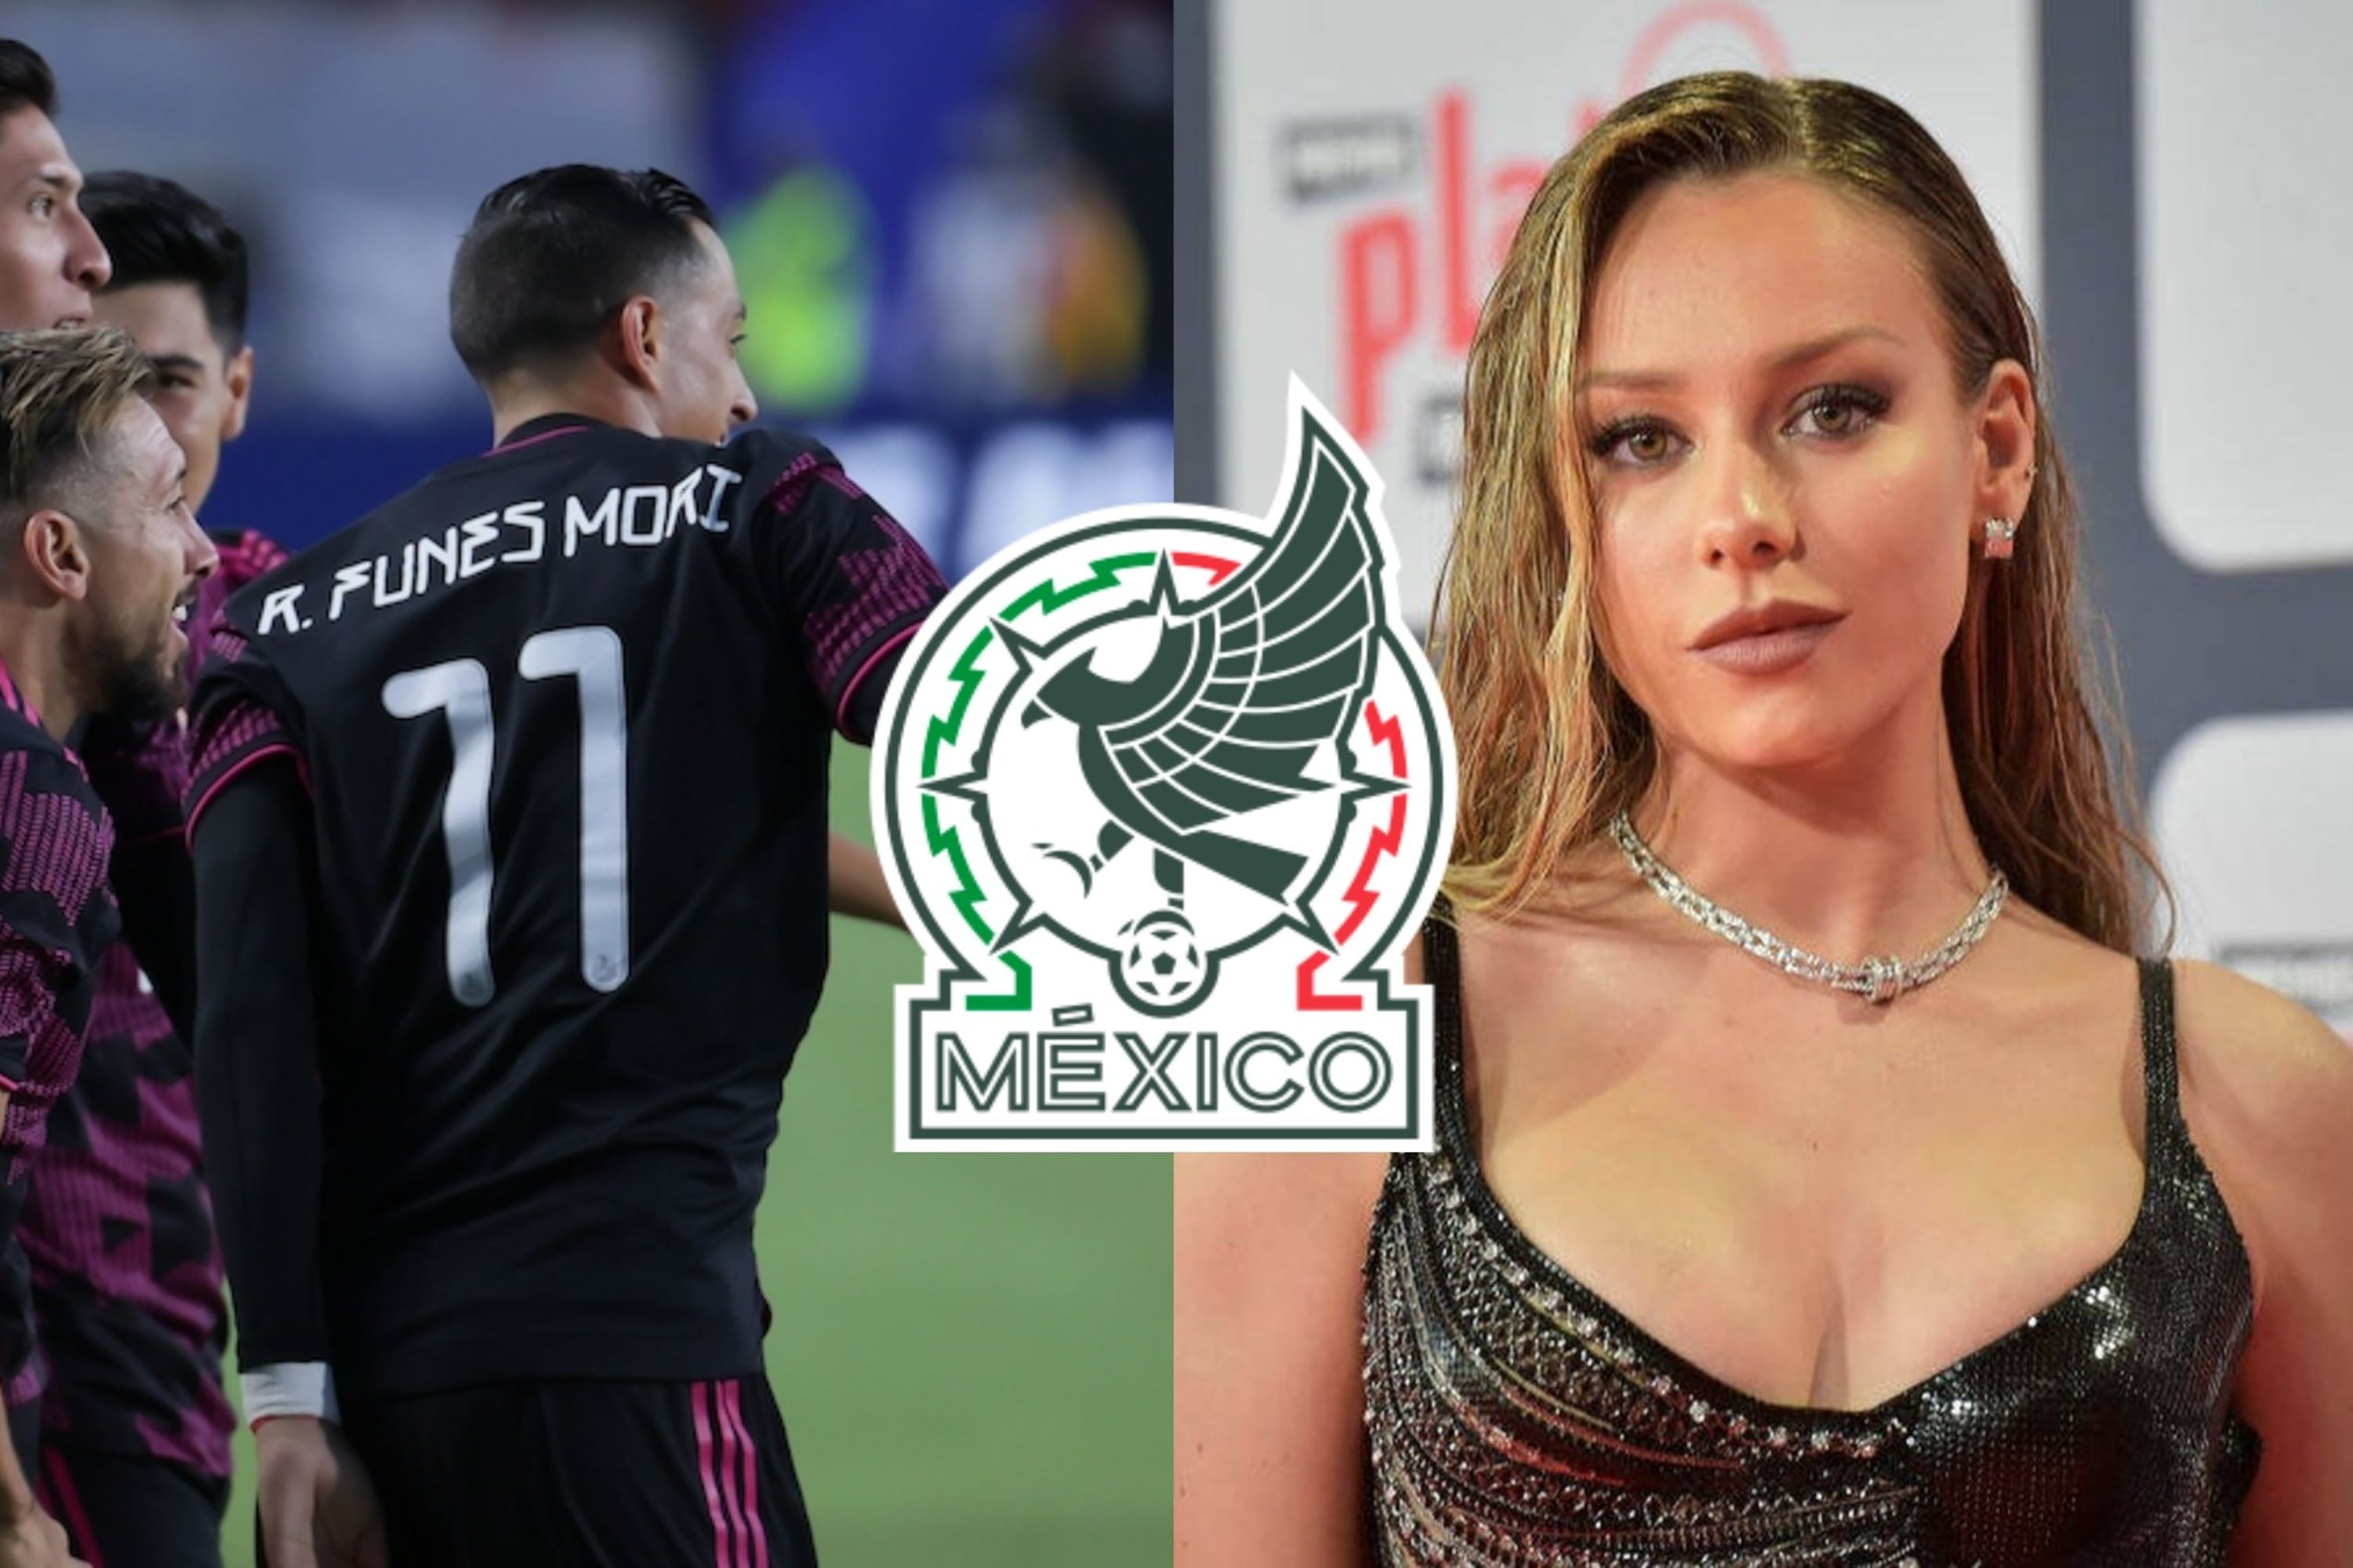 They said he was a star, Martino vetoed him from El Tri, now he is dating Ester Expósito